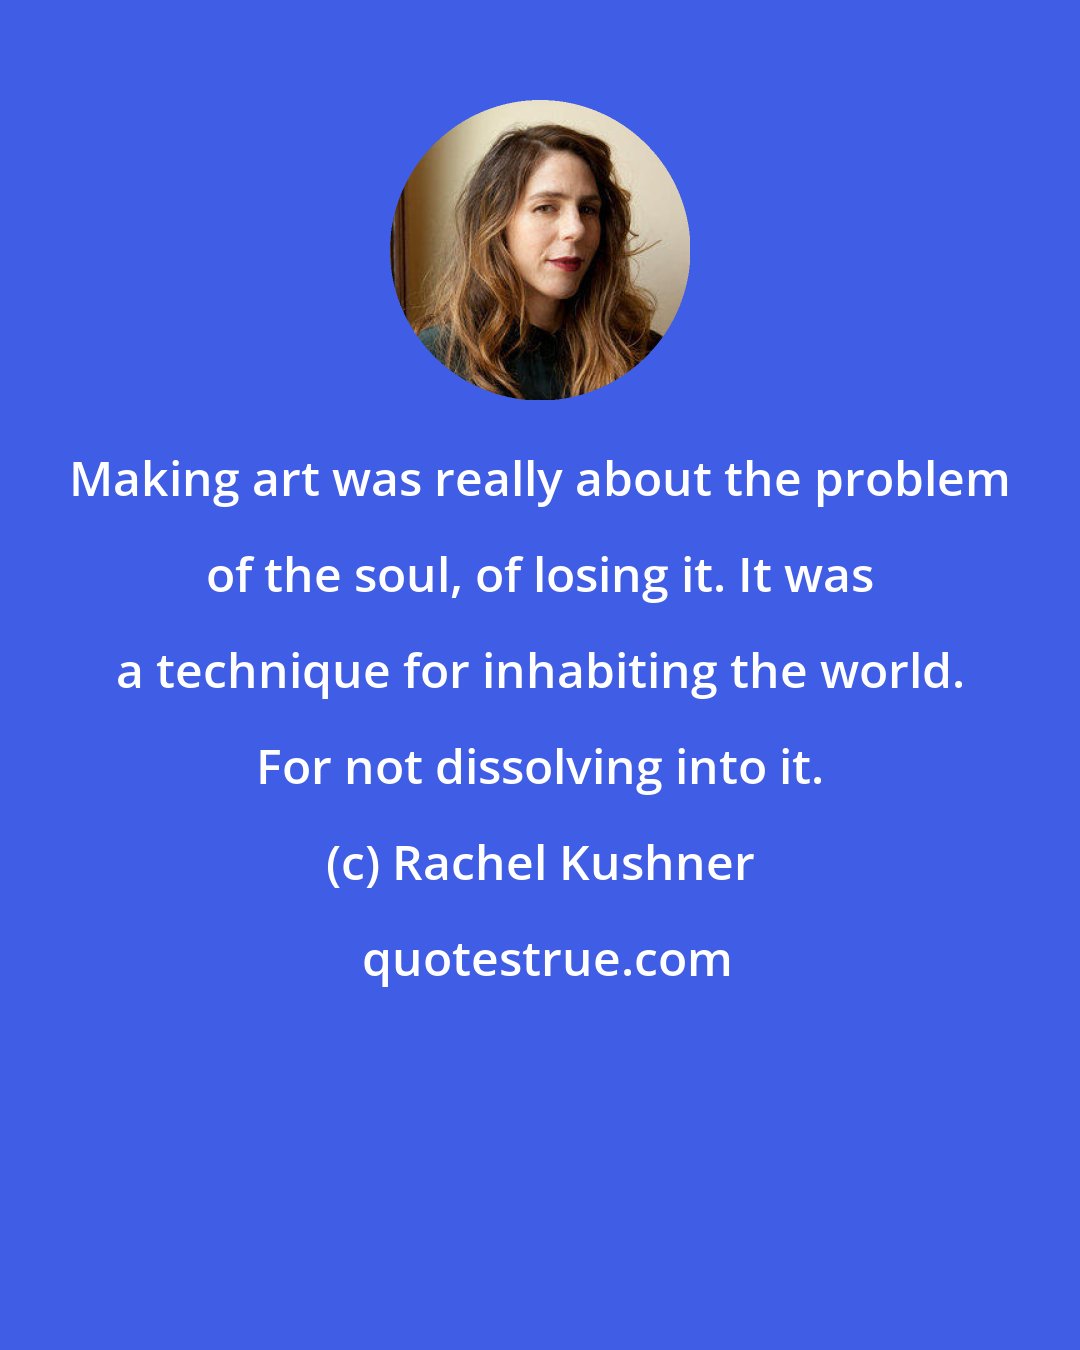 Rachel Kushner: Making art was really about the problem of the soul, of losing it. It was a technique for inhabiting the world. For not dissolving into it.